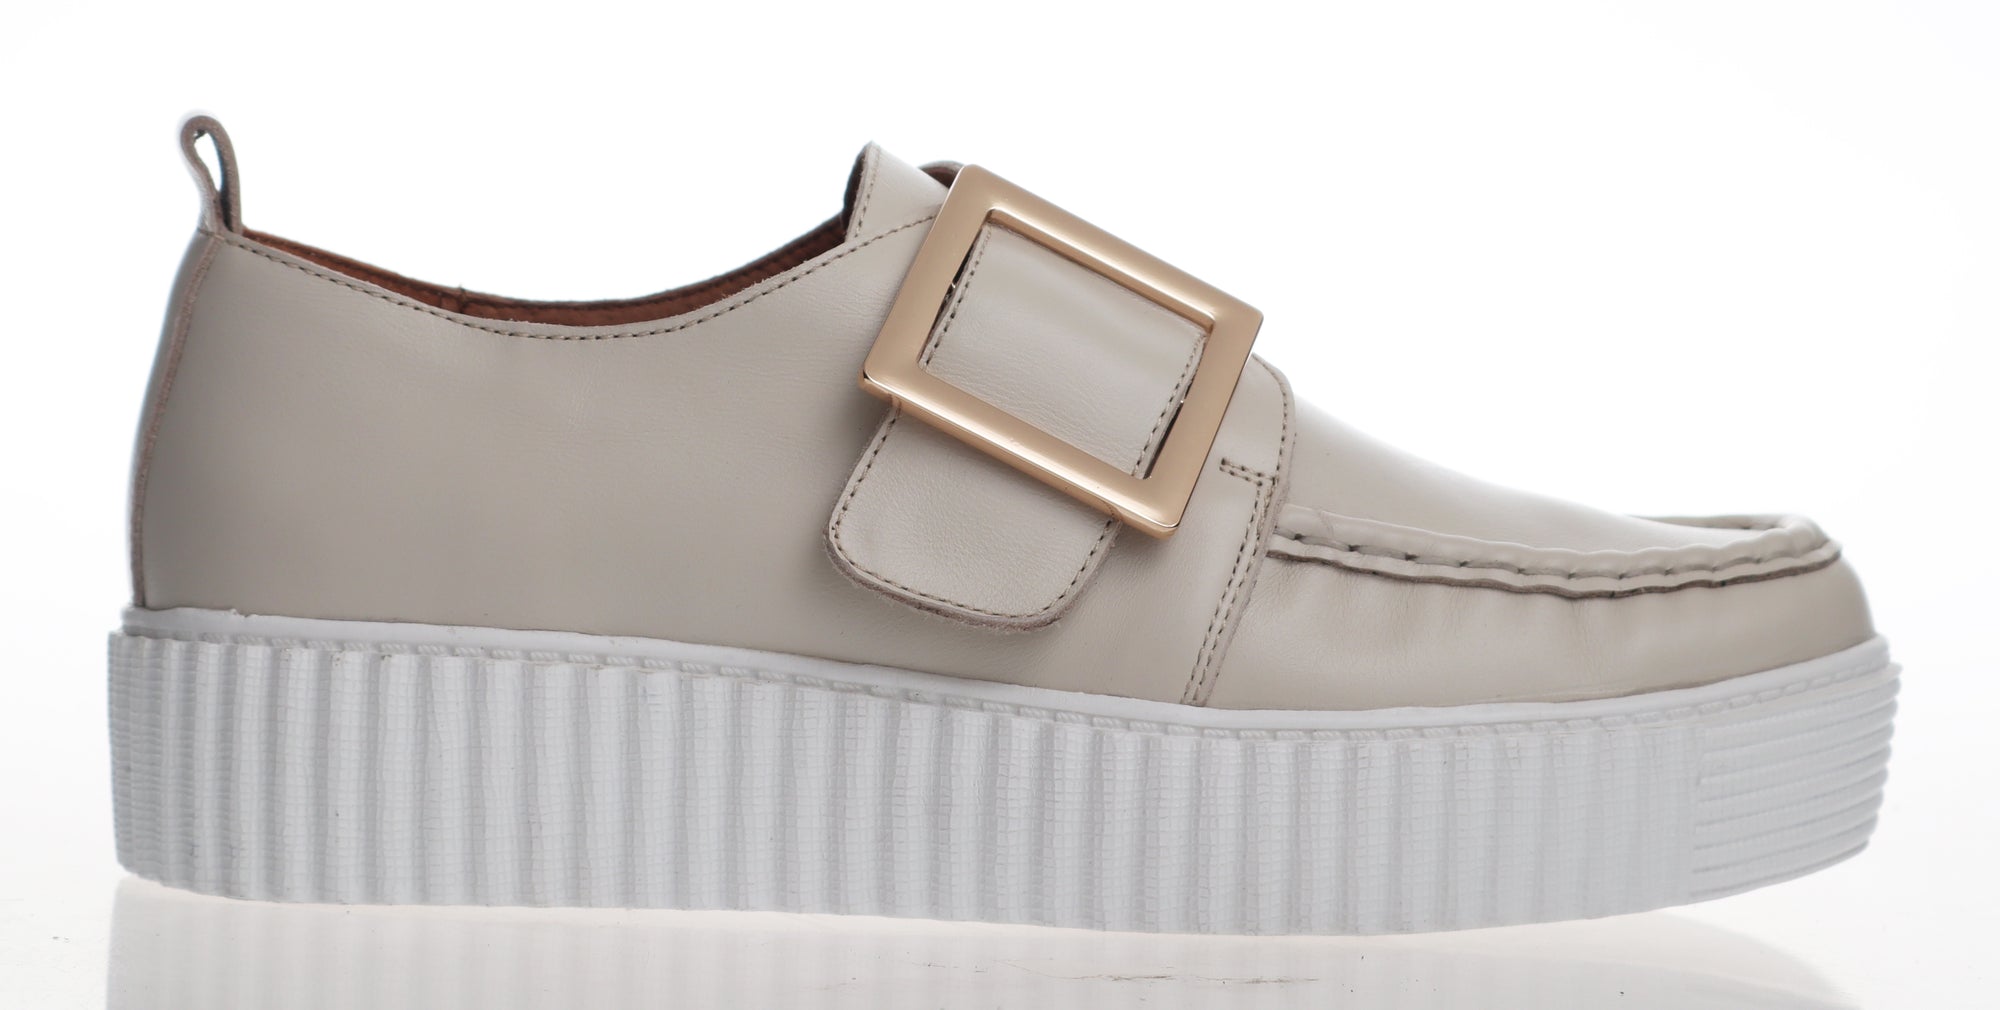 Parallel Culture Shoes and Fashion Online SNEAKERS ALFIE & EVIE DISHING BUCKLE SNEAKER CREAM